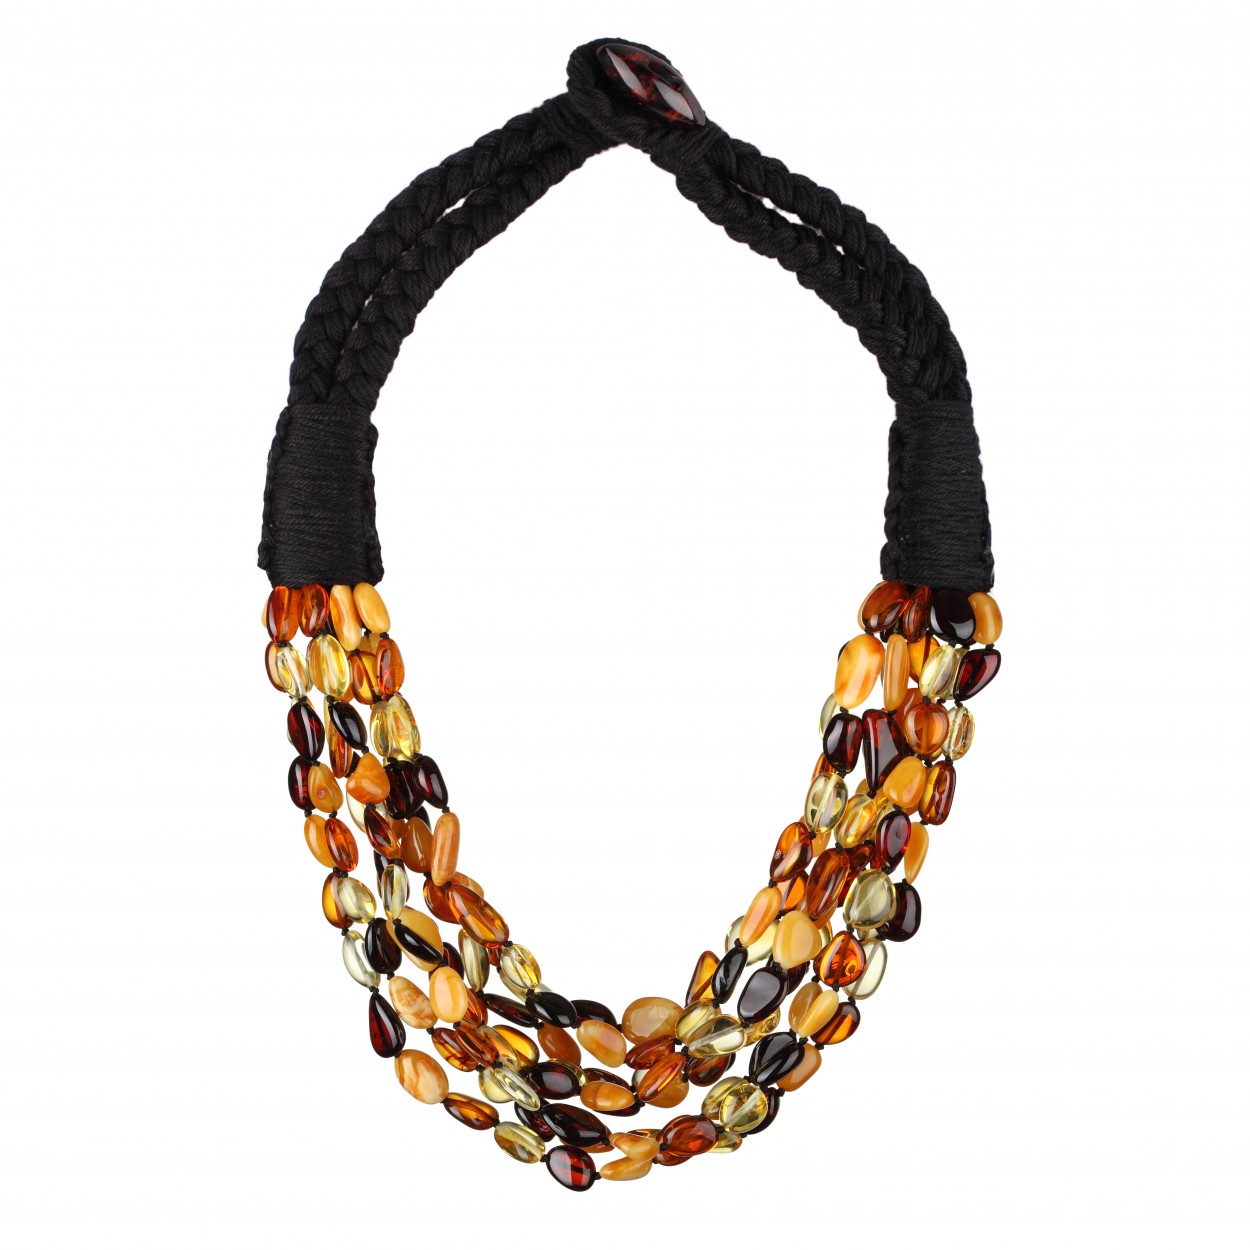  Dancing Beans  Amber Necklace